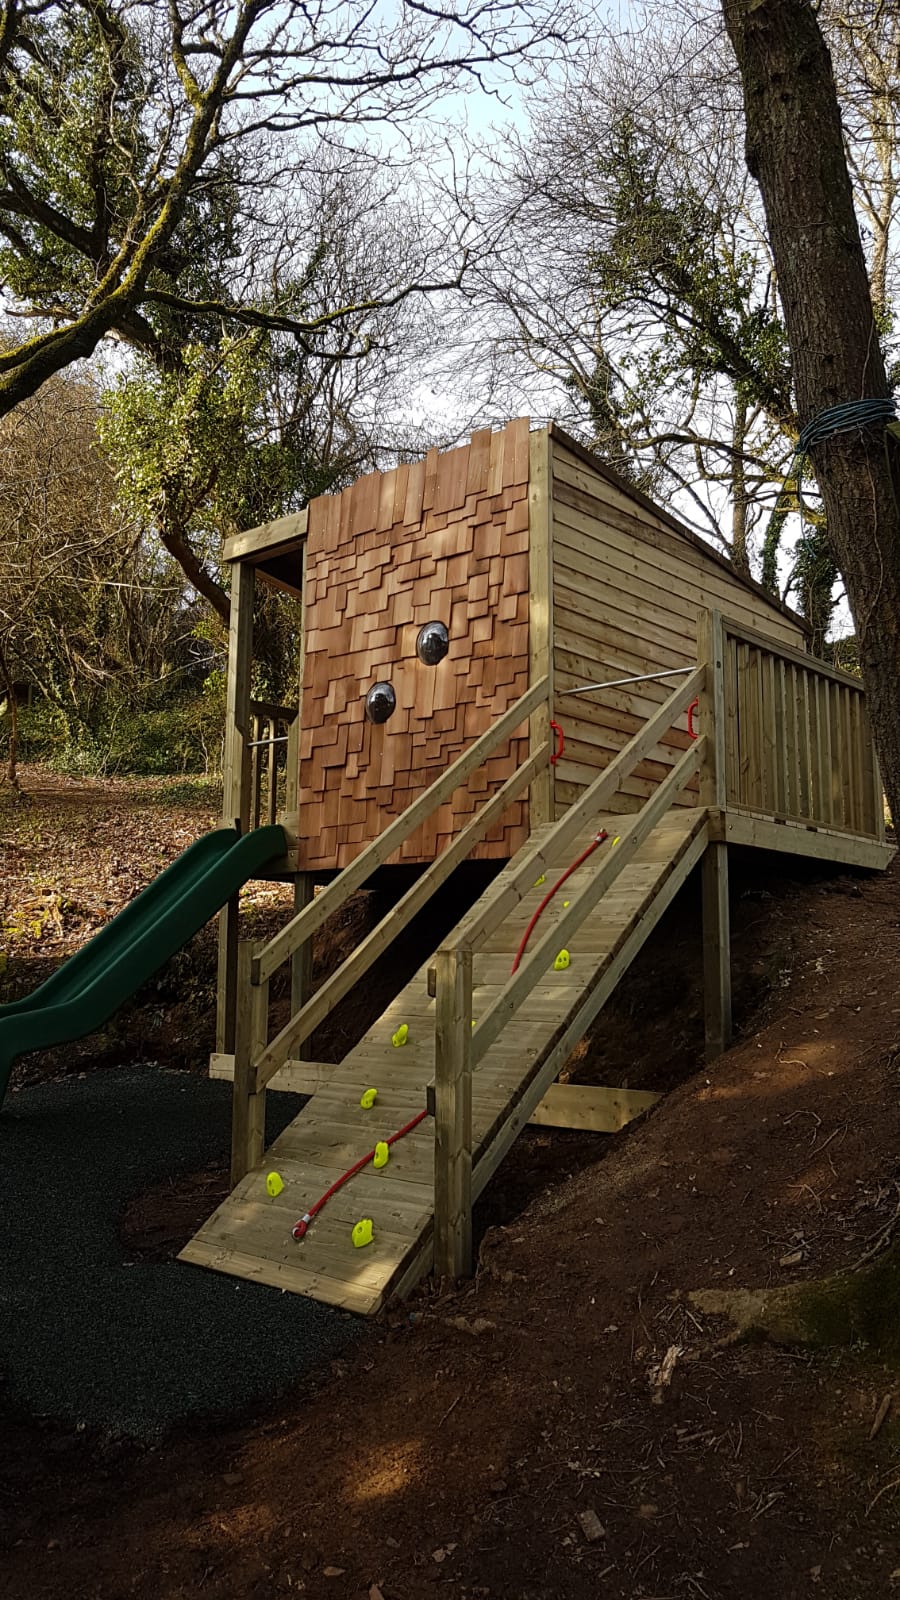 A wooden play house for Holywell School in North Devon